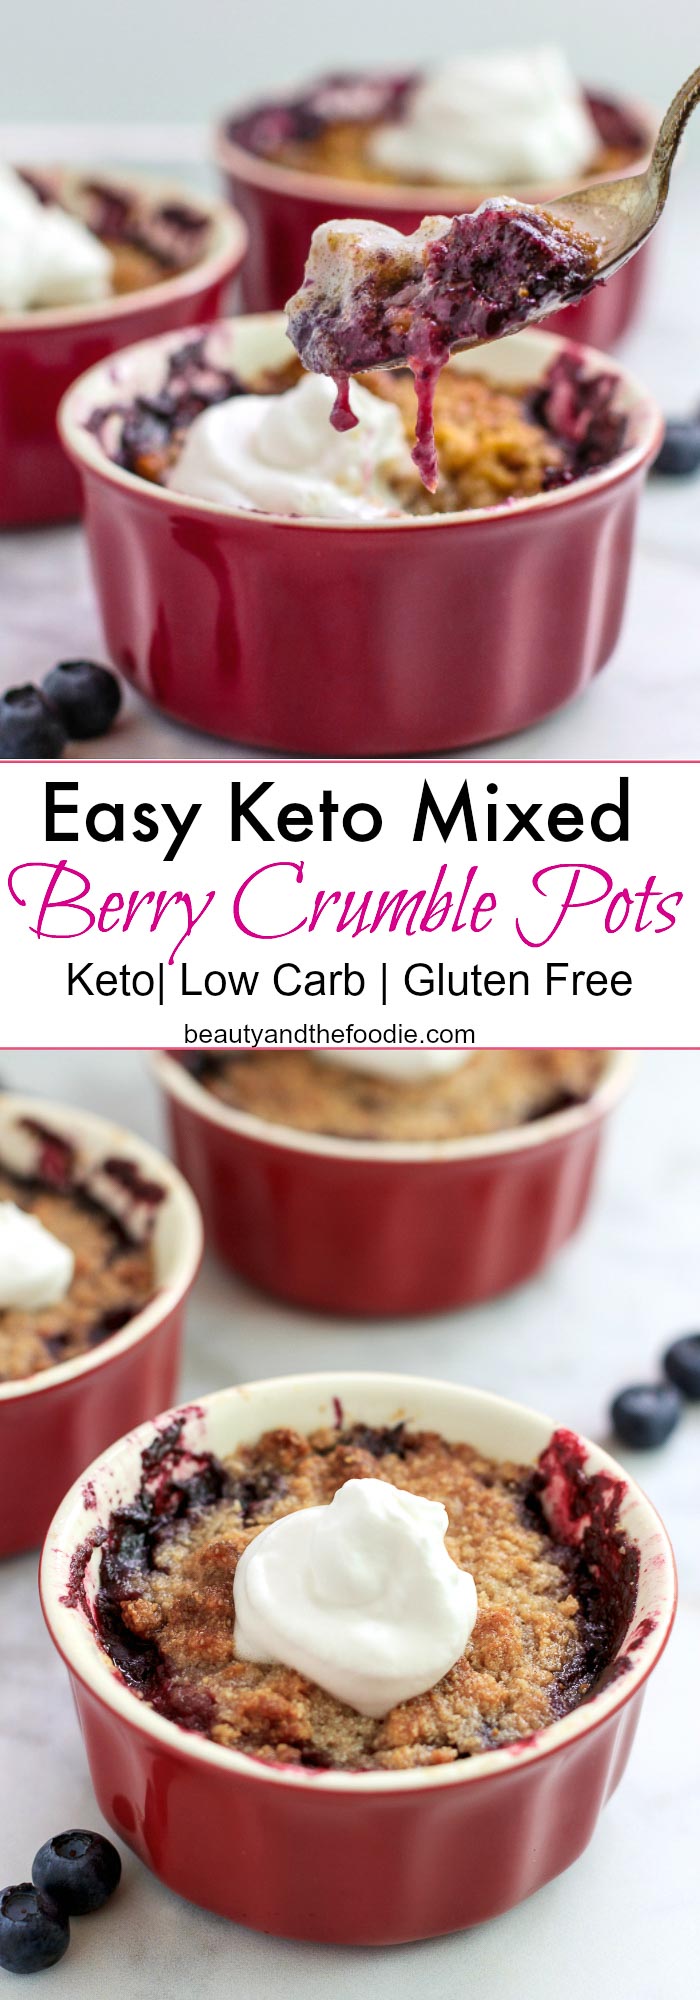 Keto Mixed Berry Crumble Pots- A simple, gluten free low carb treat